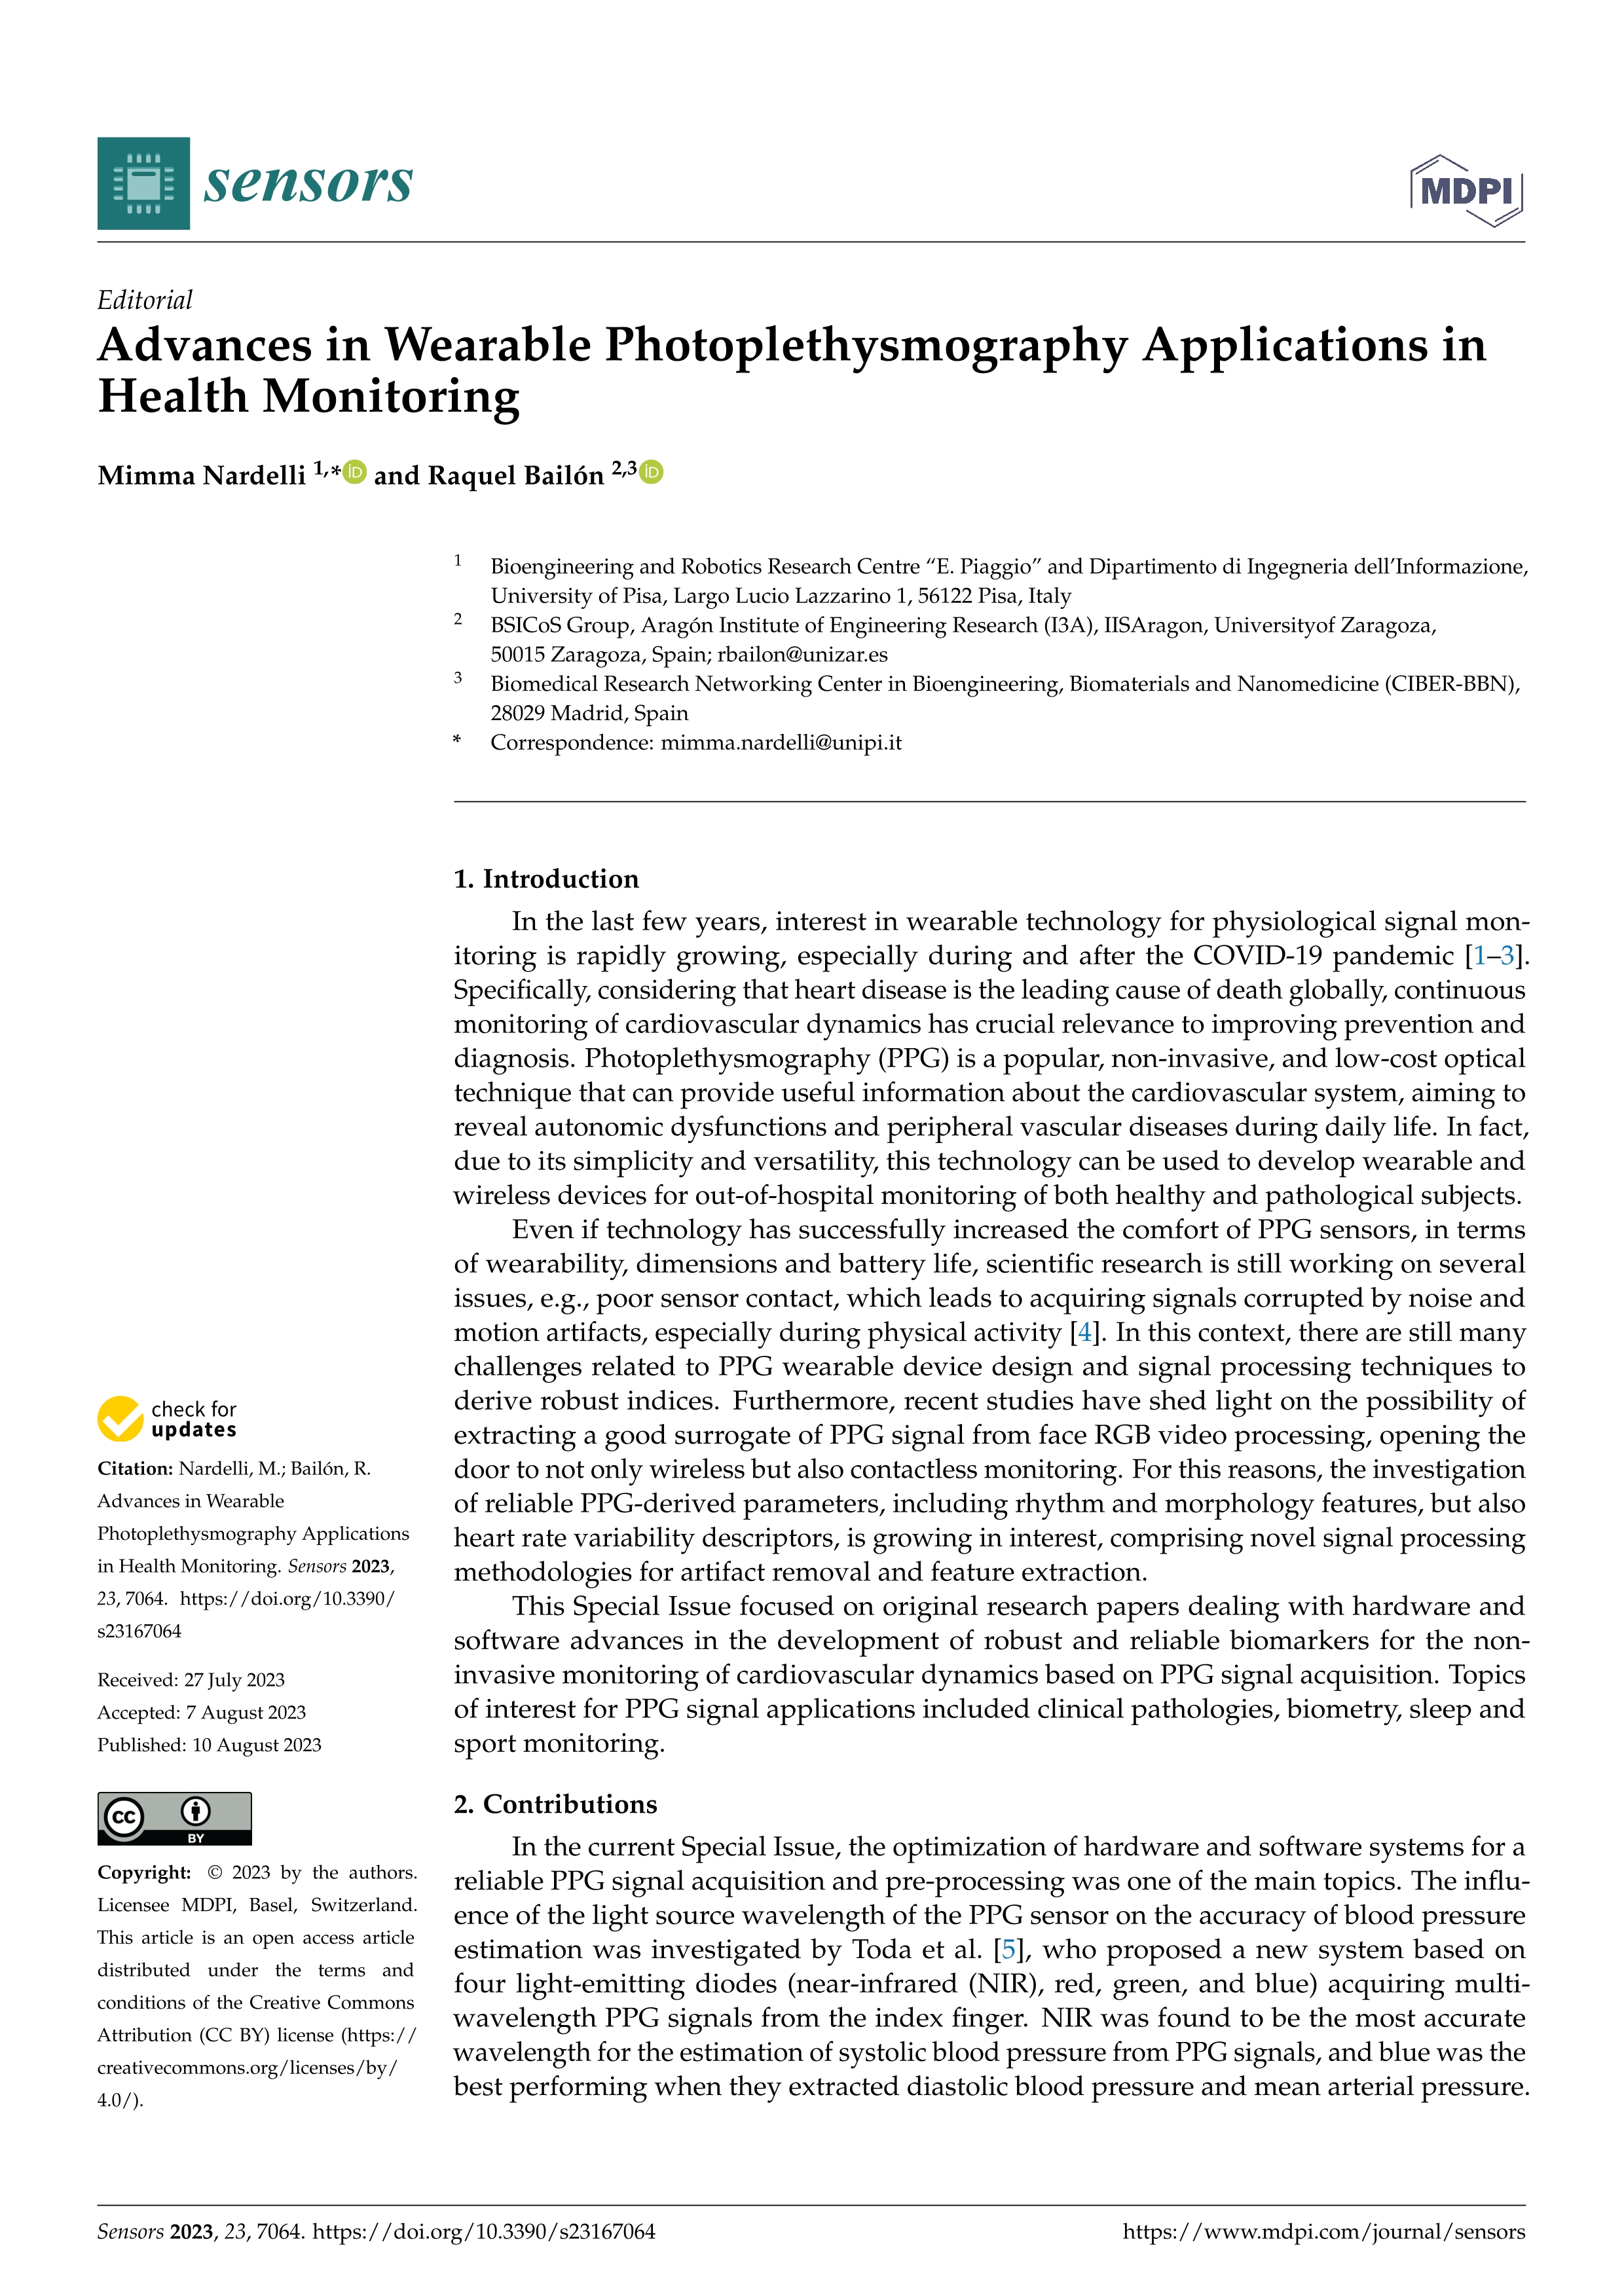 Advances in Wearable Photoplethysmography Applications in Health Monitoring